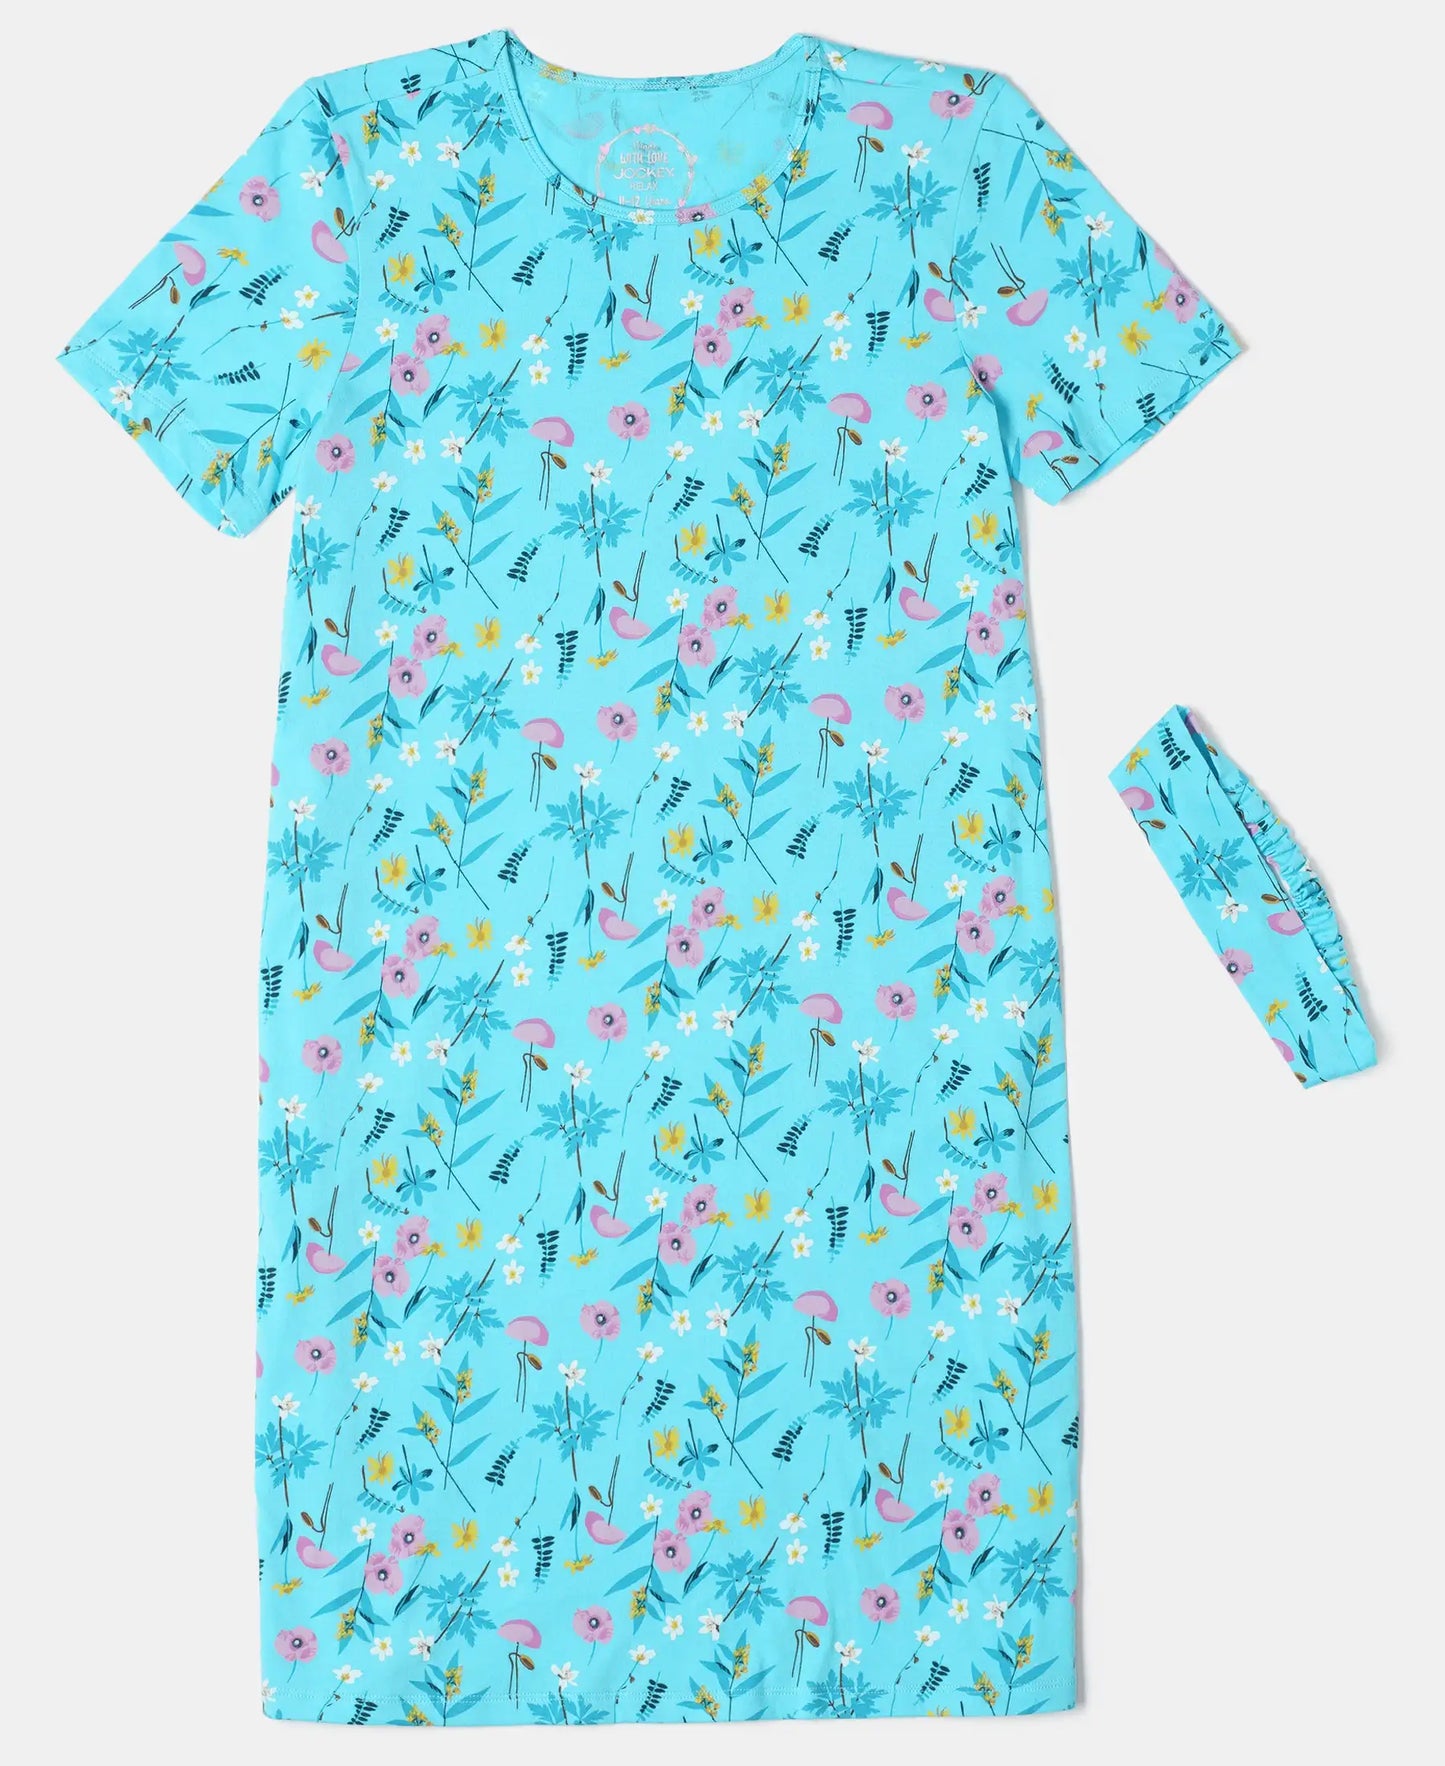 Super Combed Cotton Printed Dress with Matching Headband - Blue Curacao Printed